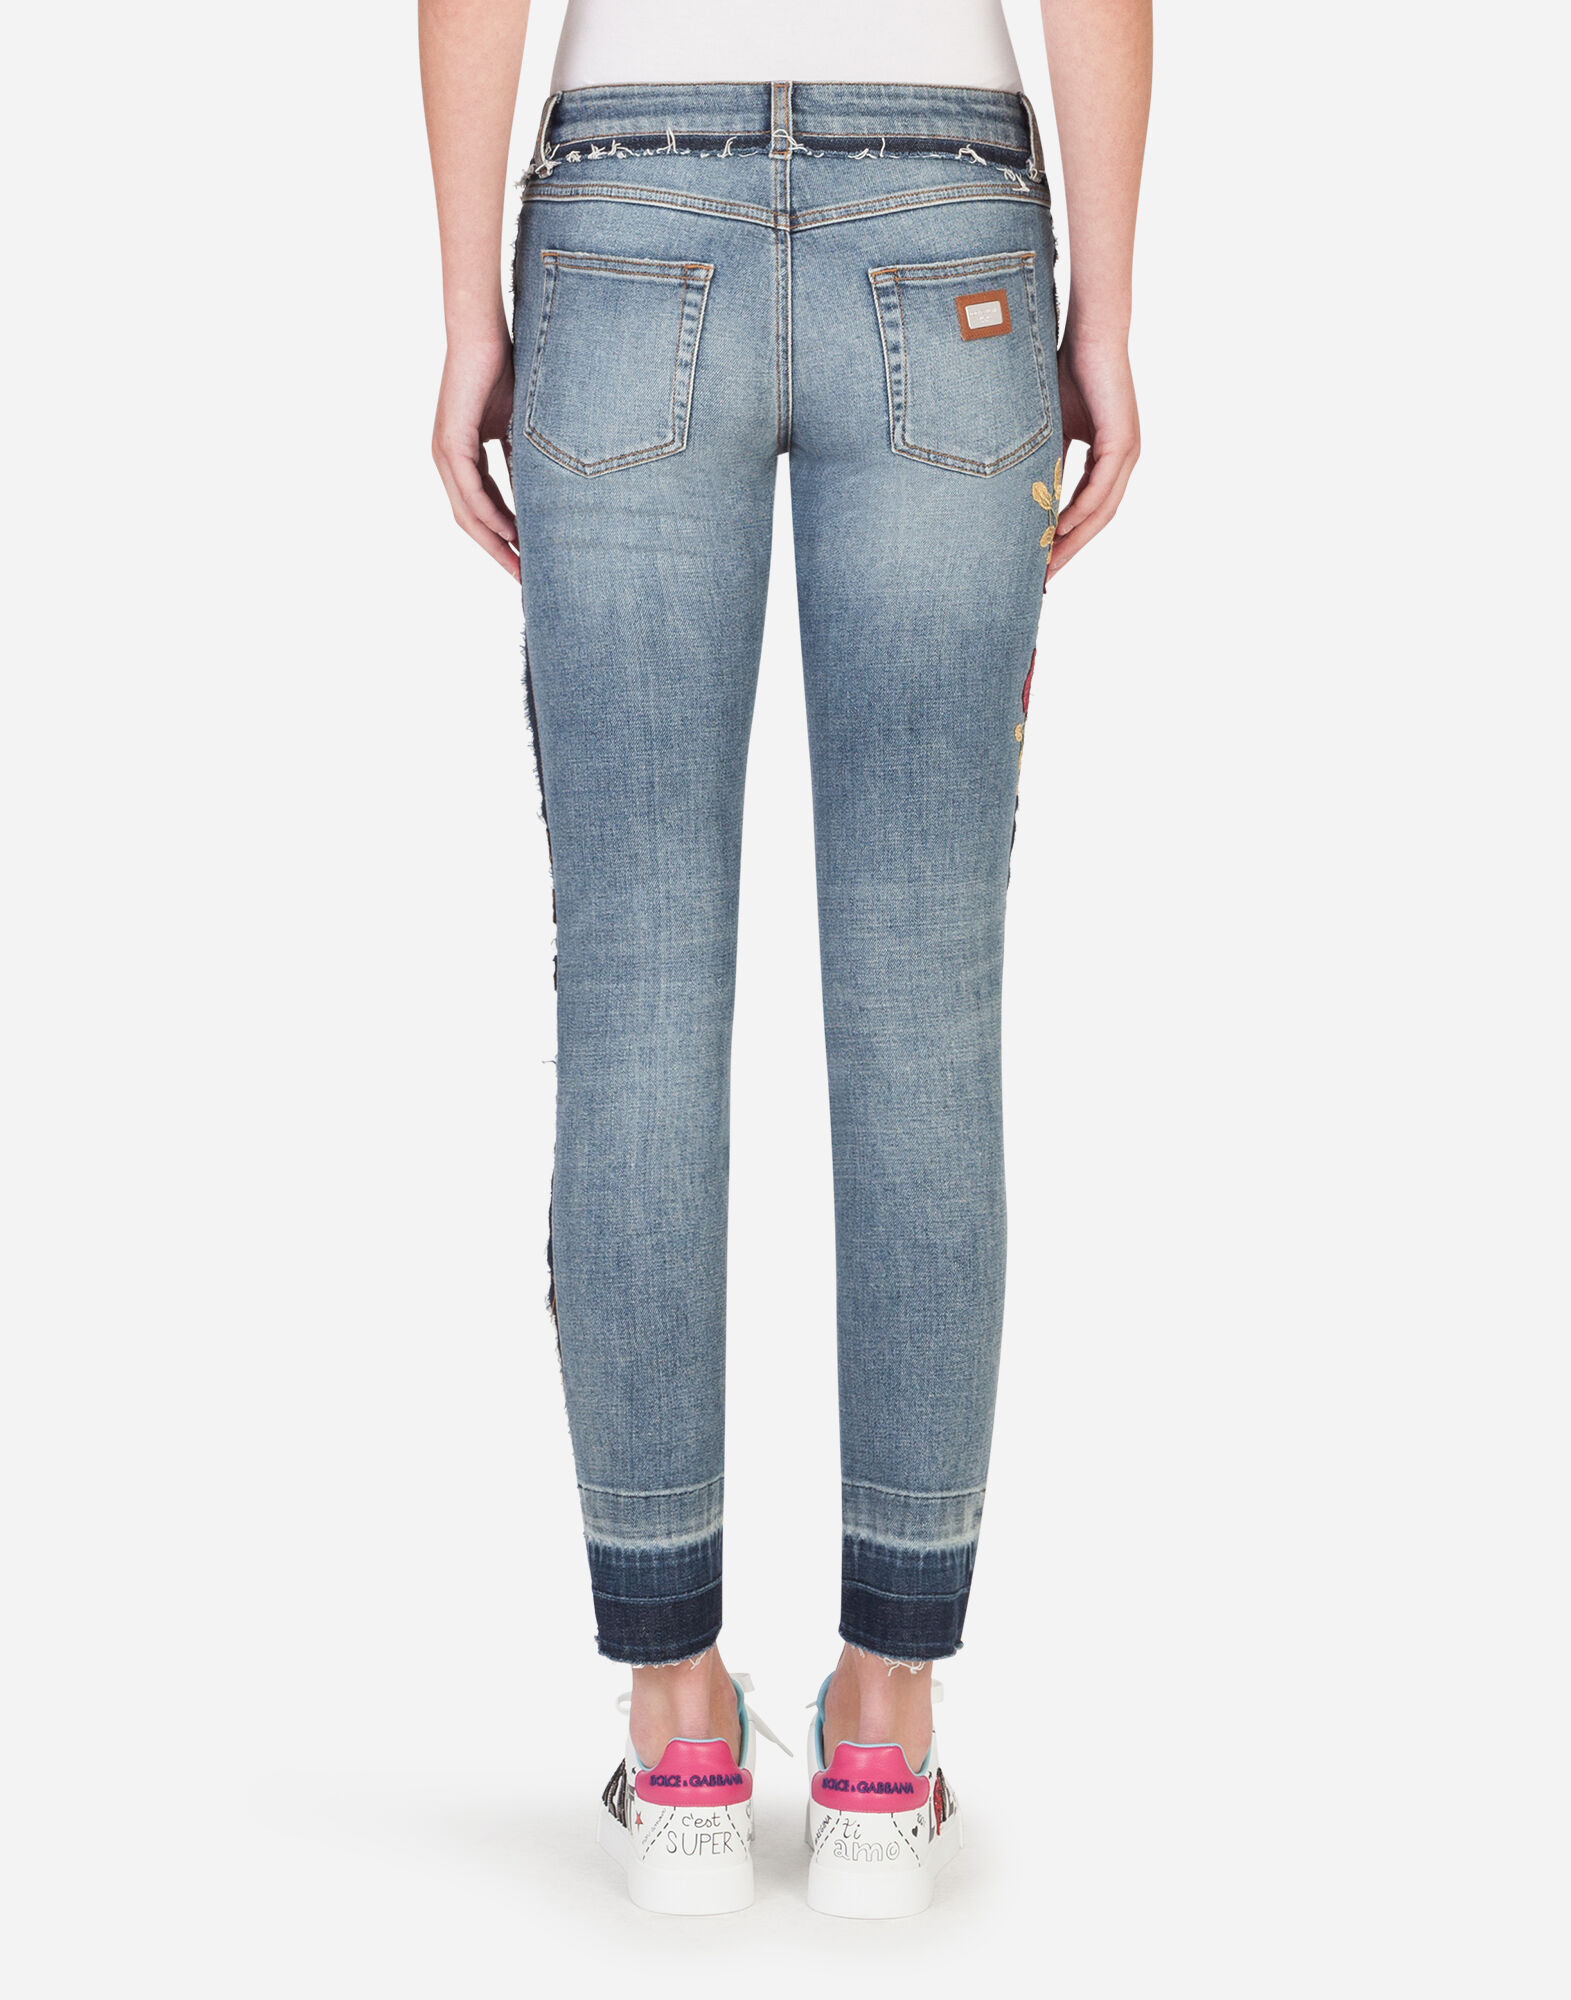 Denim jeans with patch embellishment